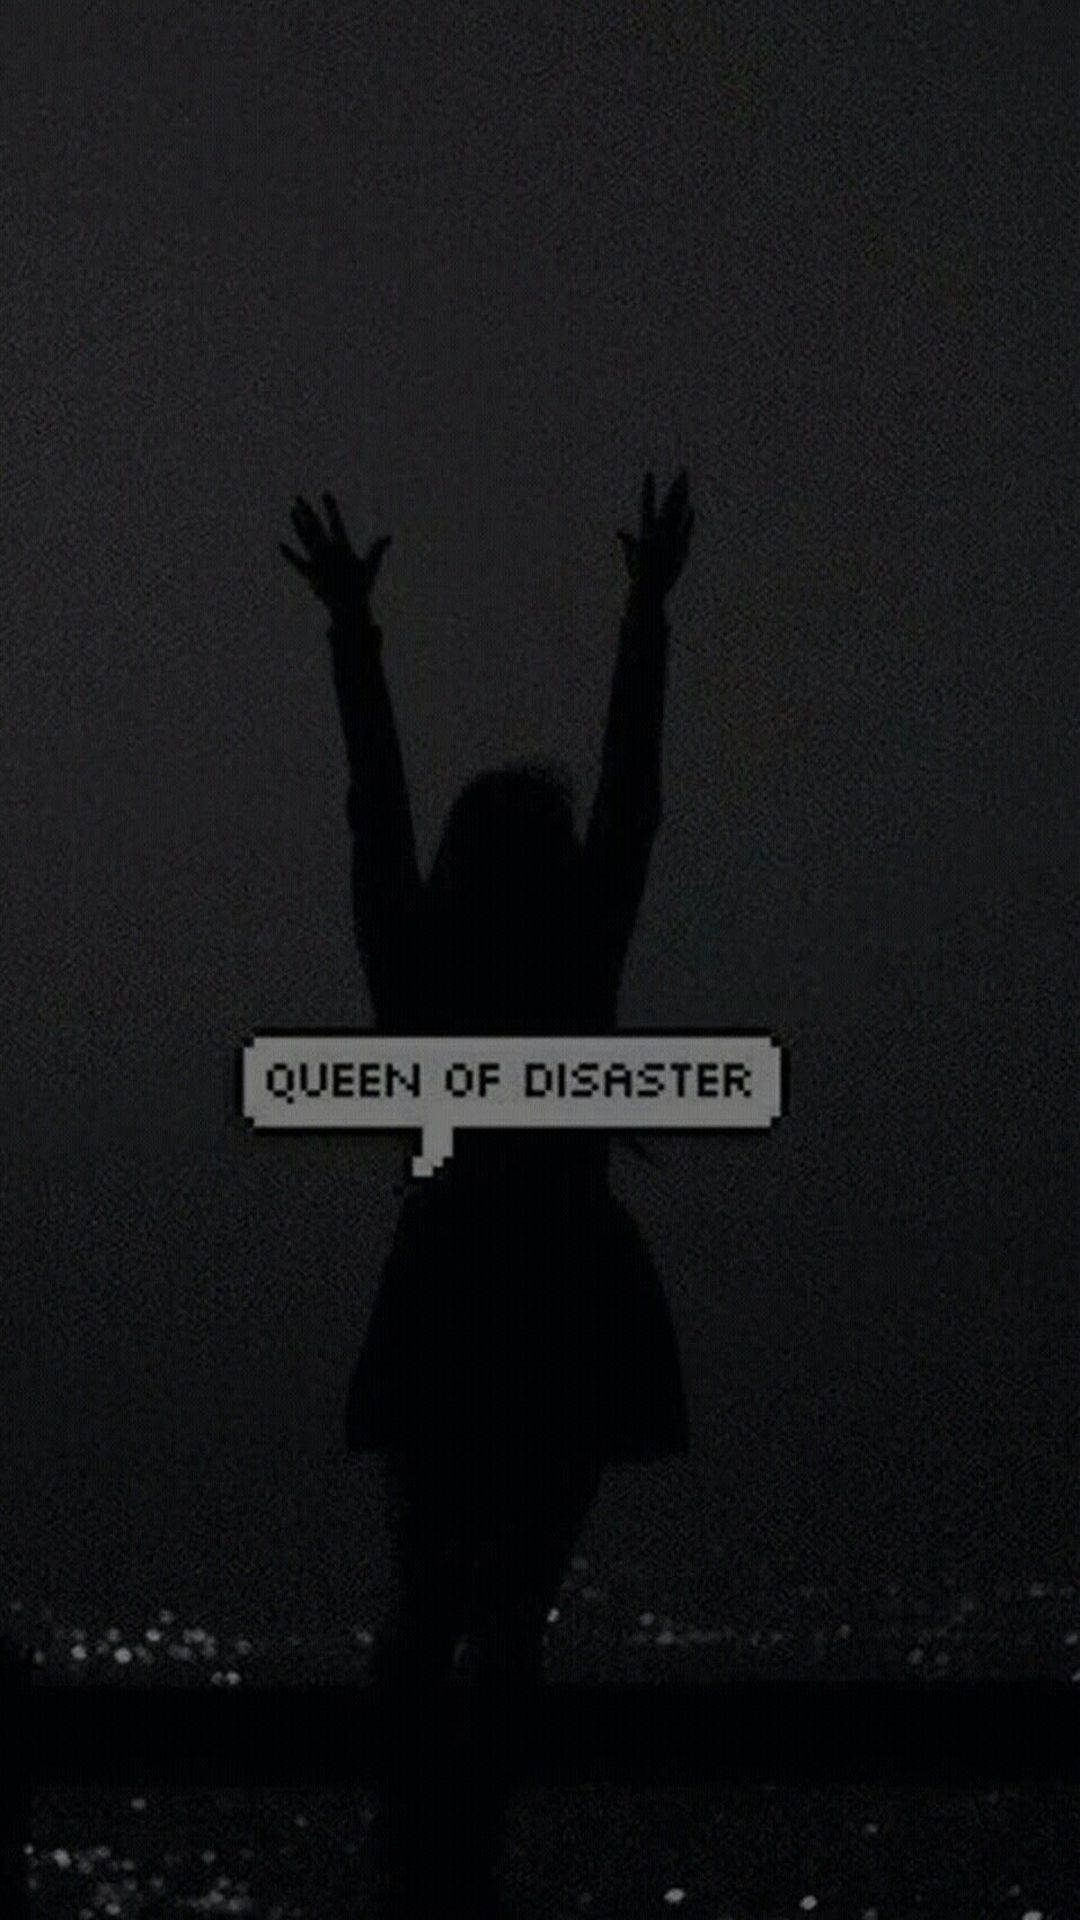 Royal Rebellion: Queen Of Disaster Portrait Background